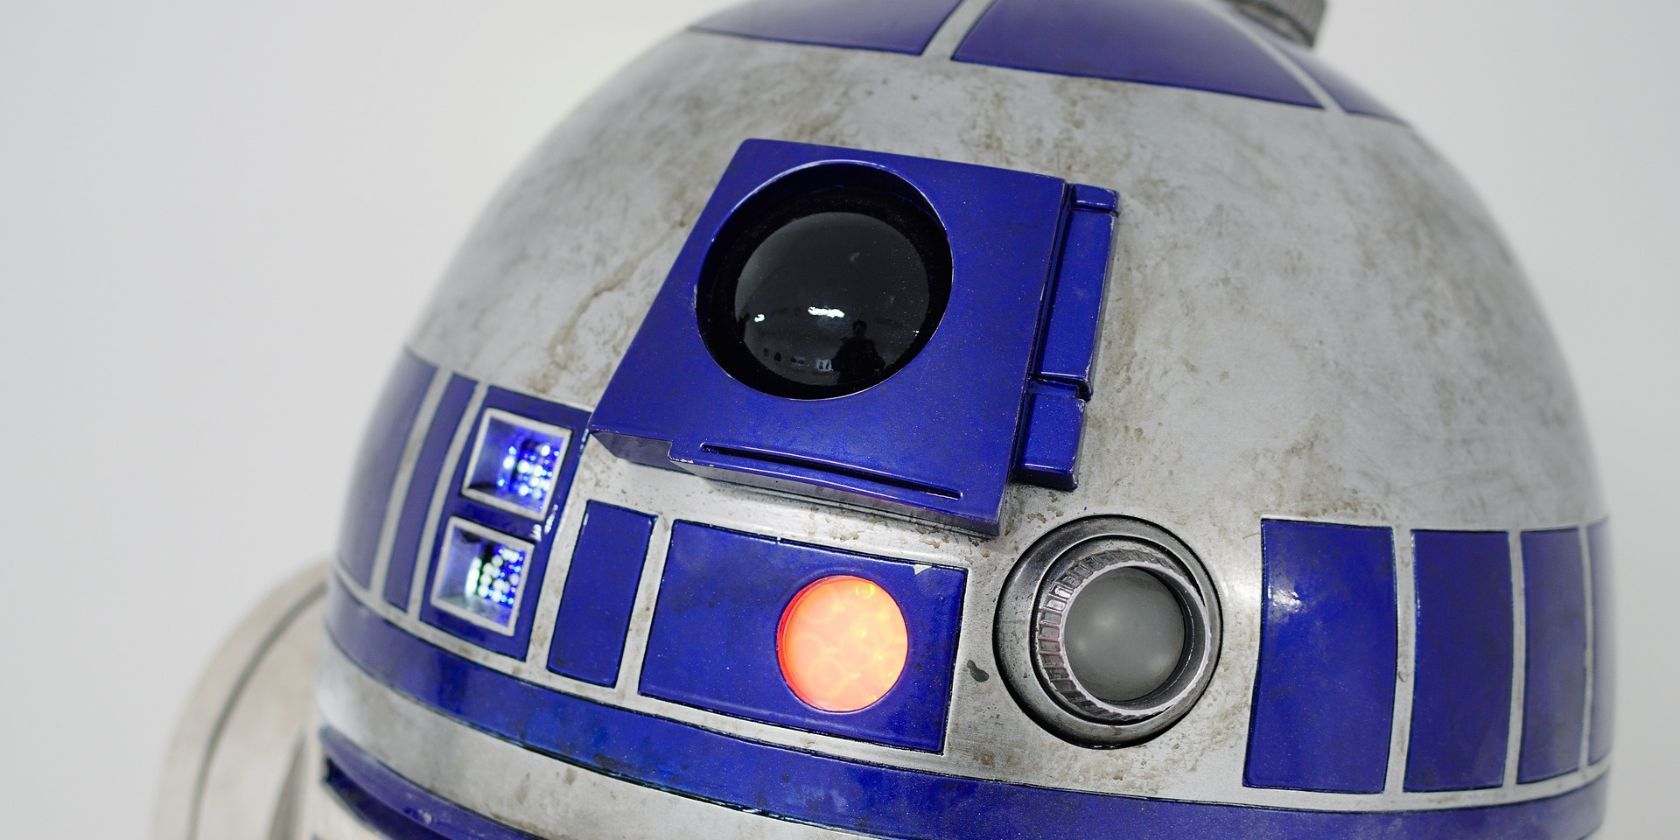 R2d2 from Star Wars